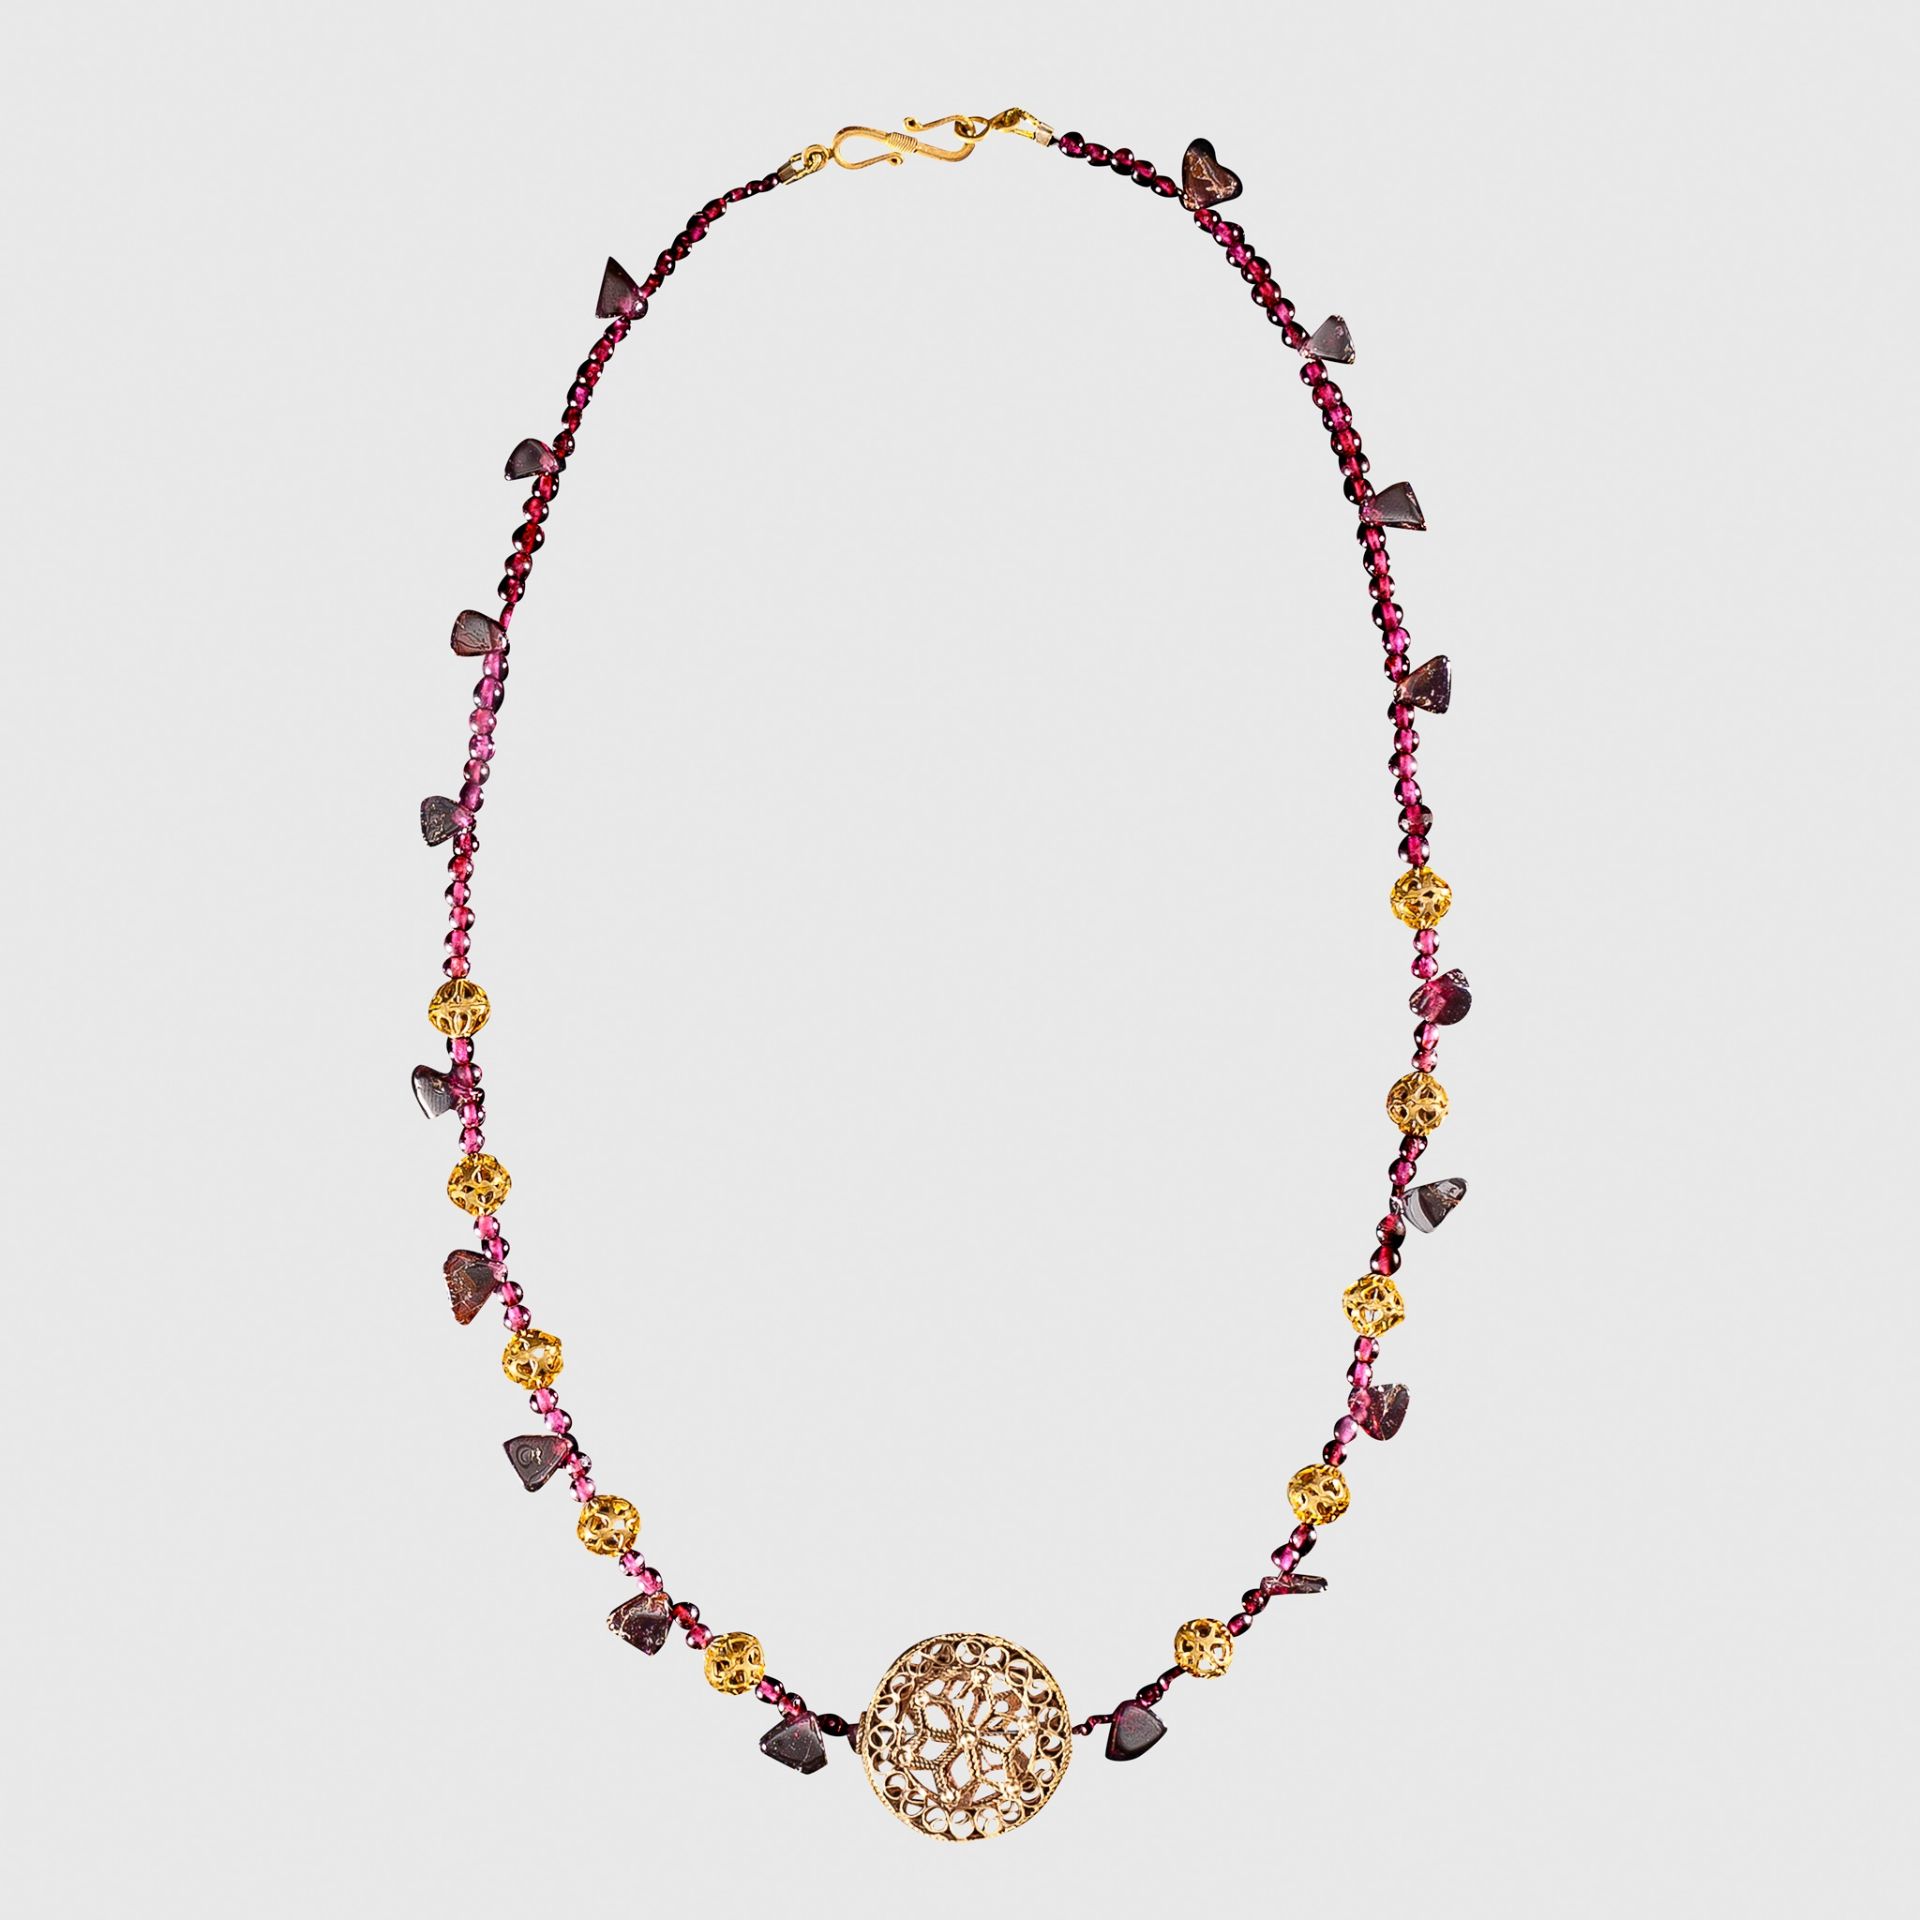 BYZANTINE AMETHYST NECKLACE WITH GOLD OPENWORK PENDANT EASTERN MEDDITTEREAN, C. 6TH - 7TH CENTURY A